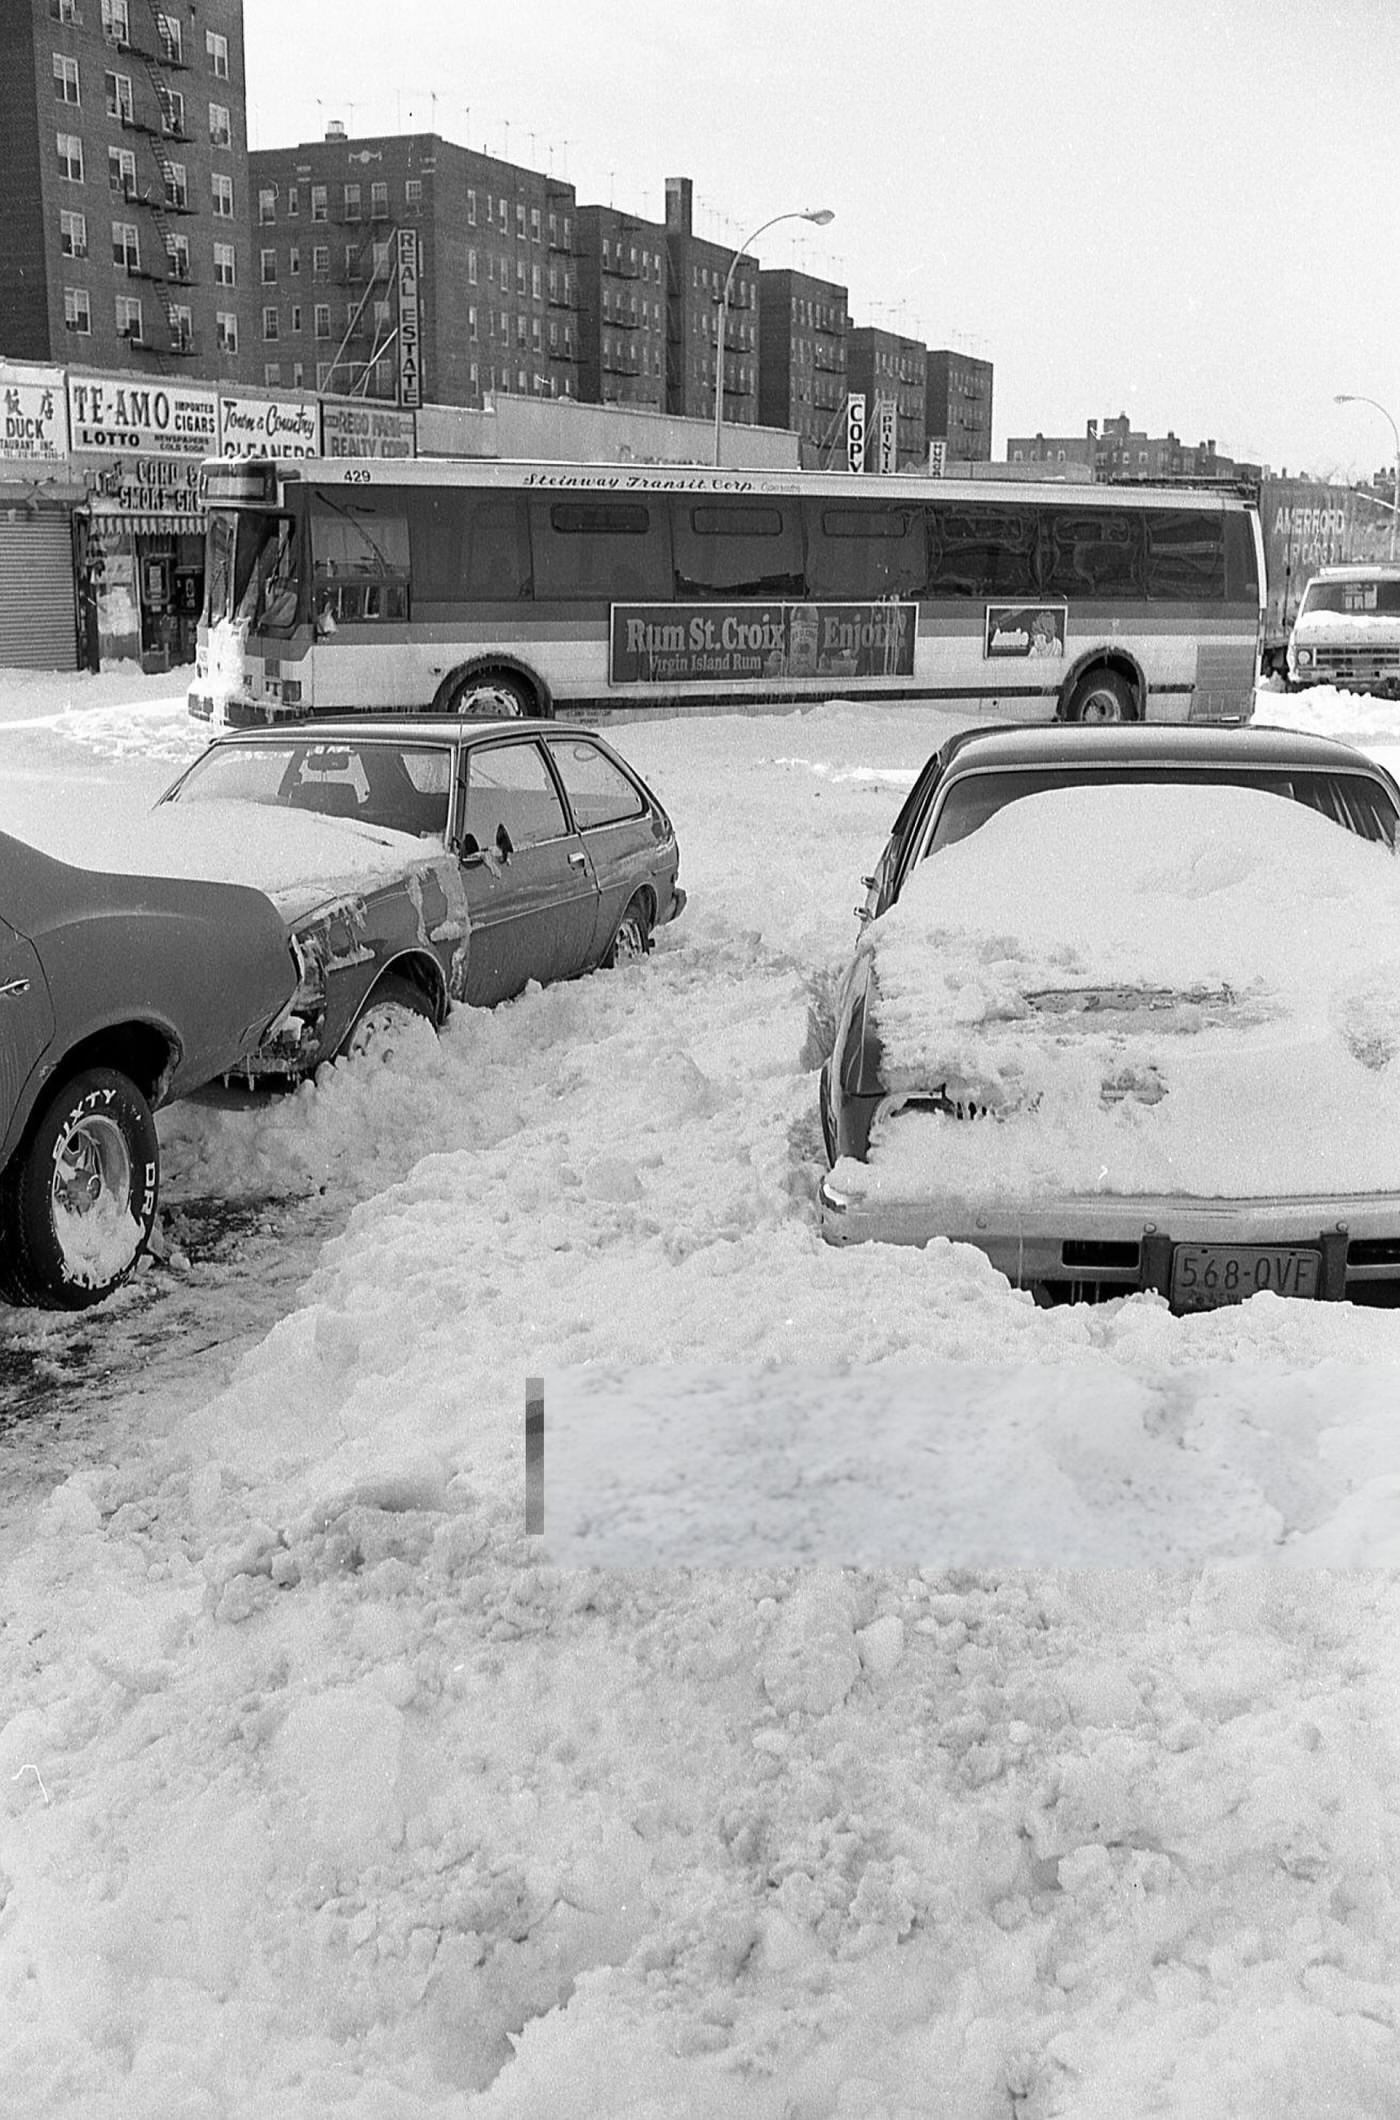 Stranded Cars And A City Bus On Queens Boulevard In The Aftermath Of A Blizzard In Rego Park, Queens, 1983.